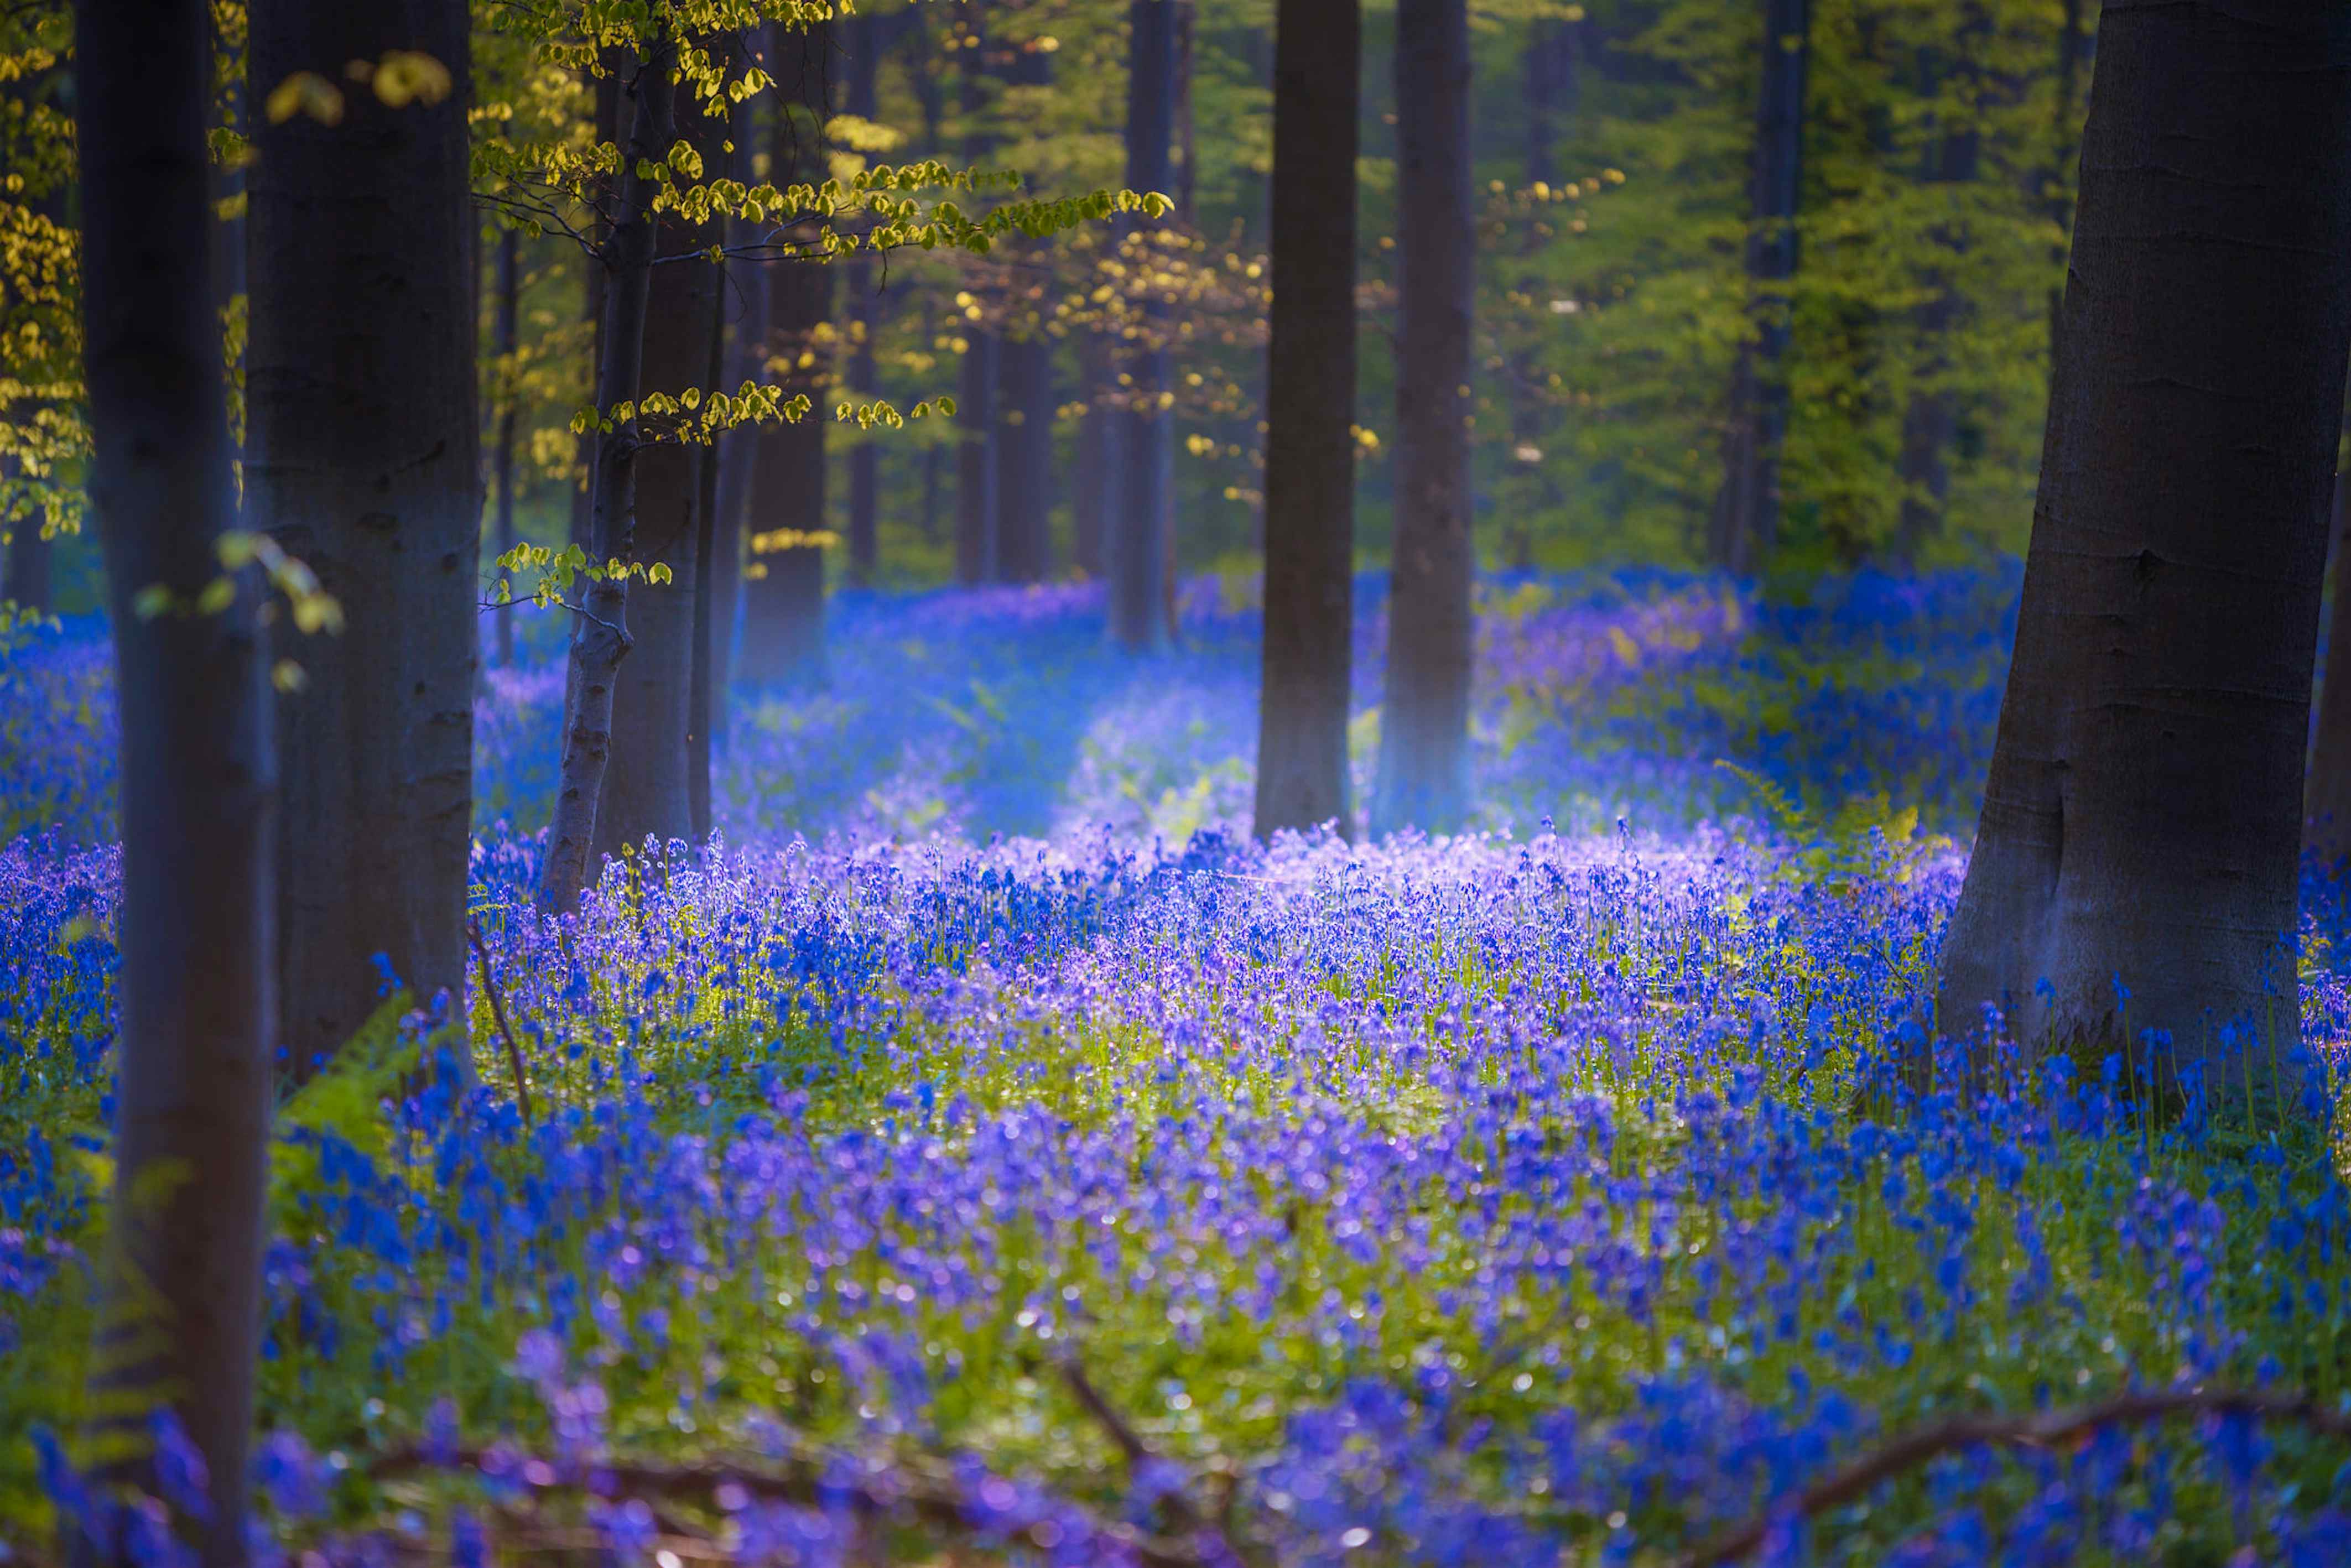 This magical forest in Belgium is covered in blue flowers in spring